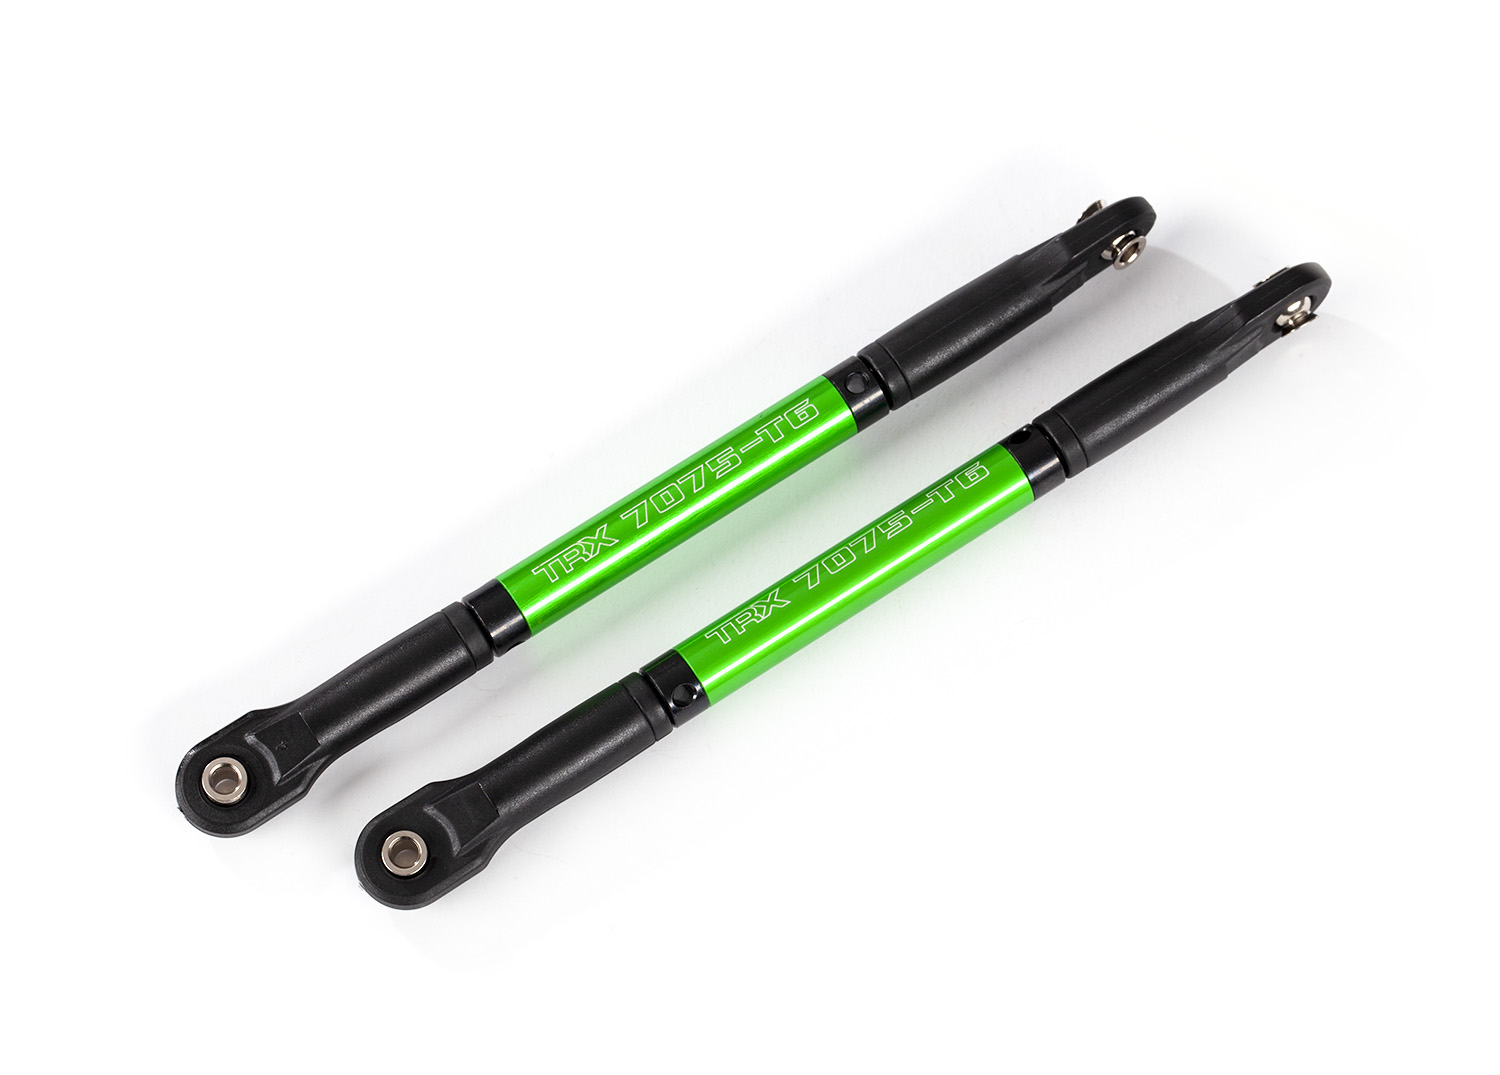 Traxxas Push rods, aluminum (green-anodized), heavy duty (2) (assembled with rod ends and threaded inserts) - TRX8619G